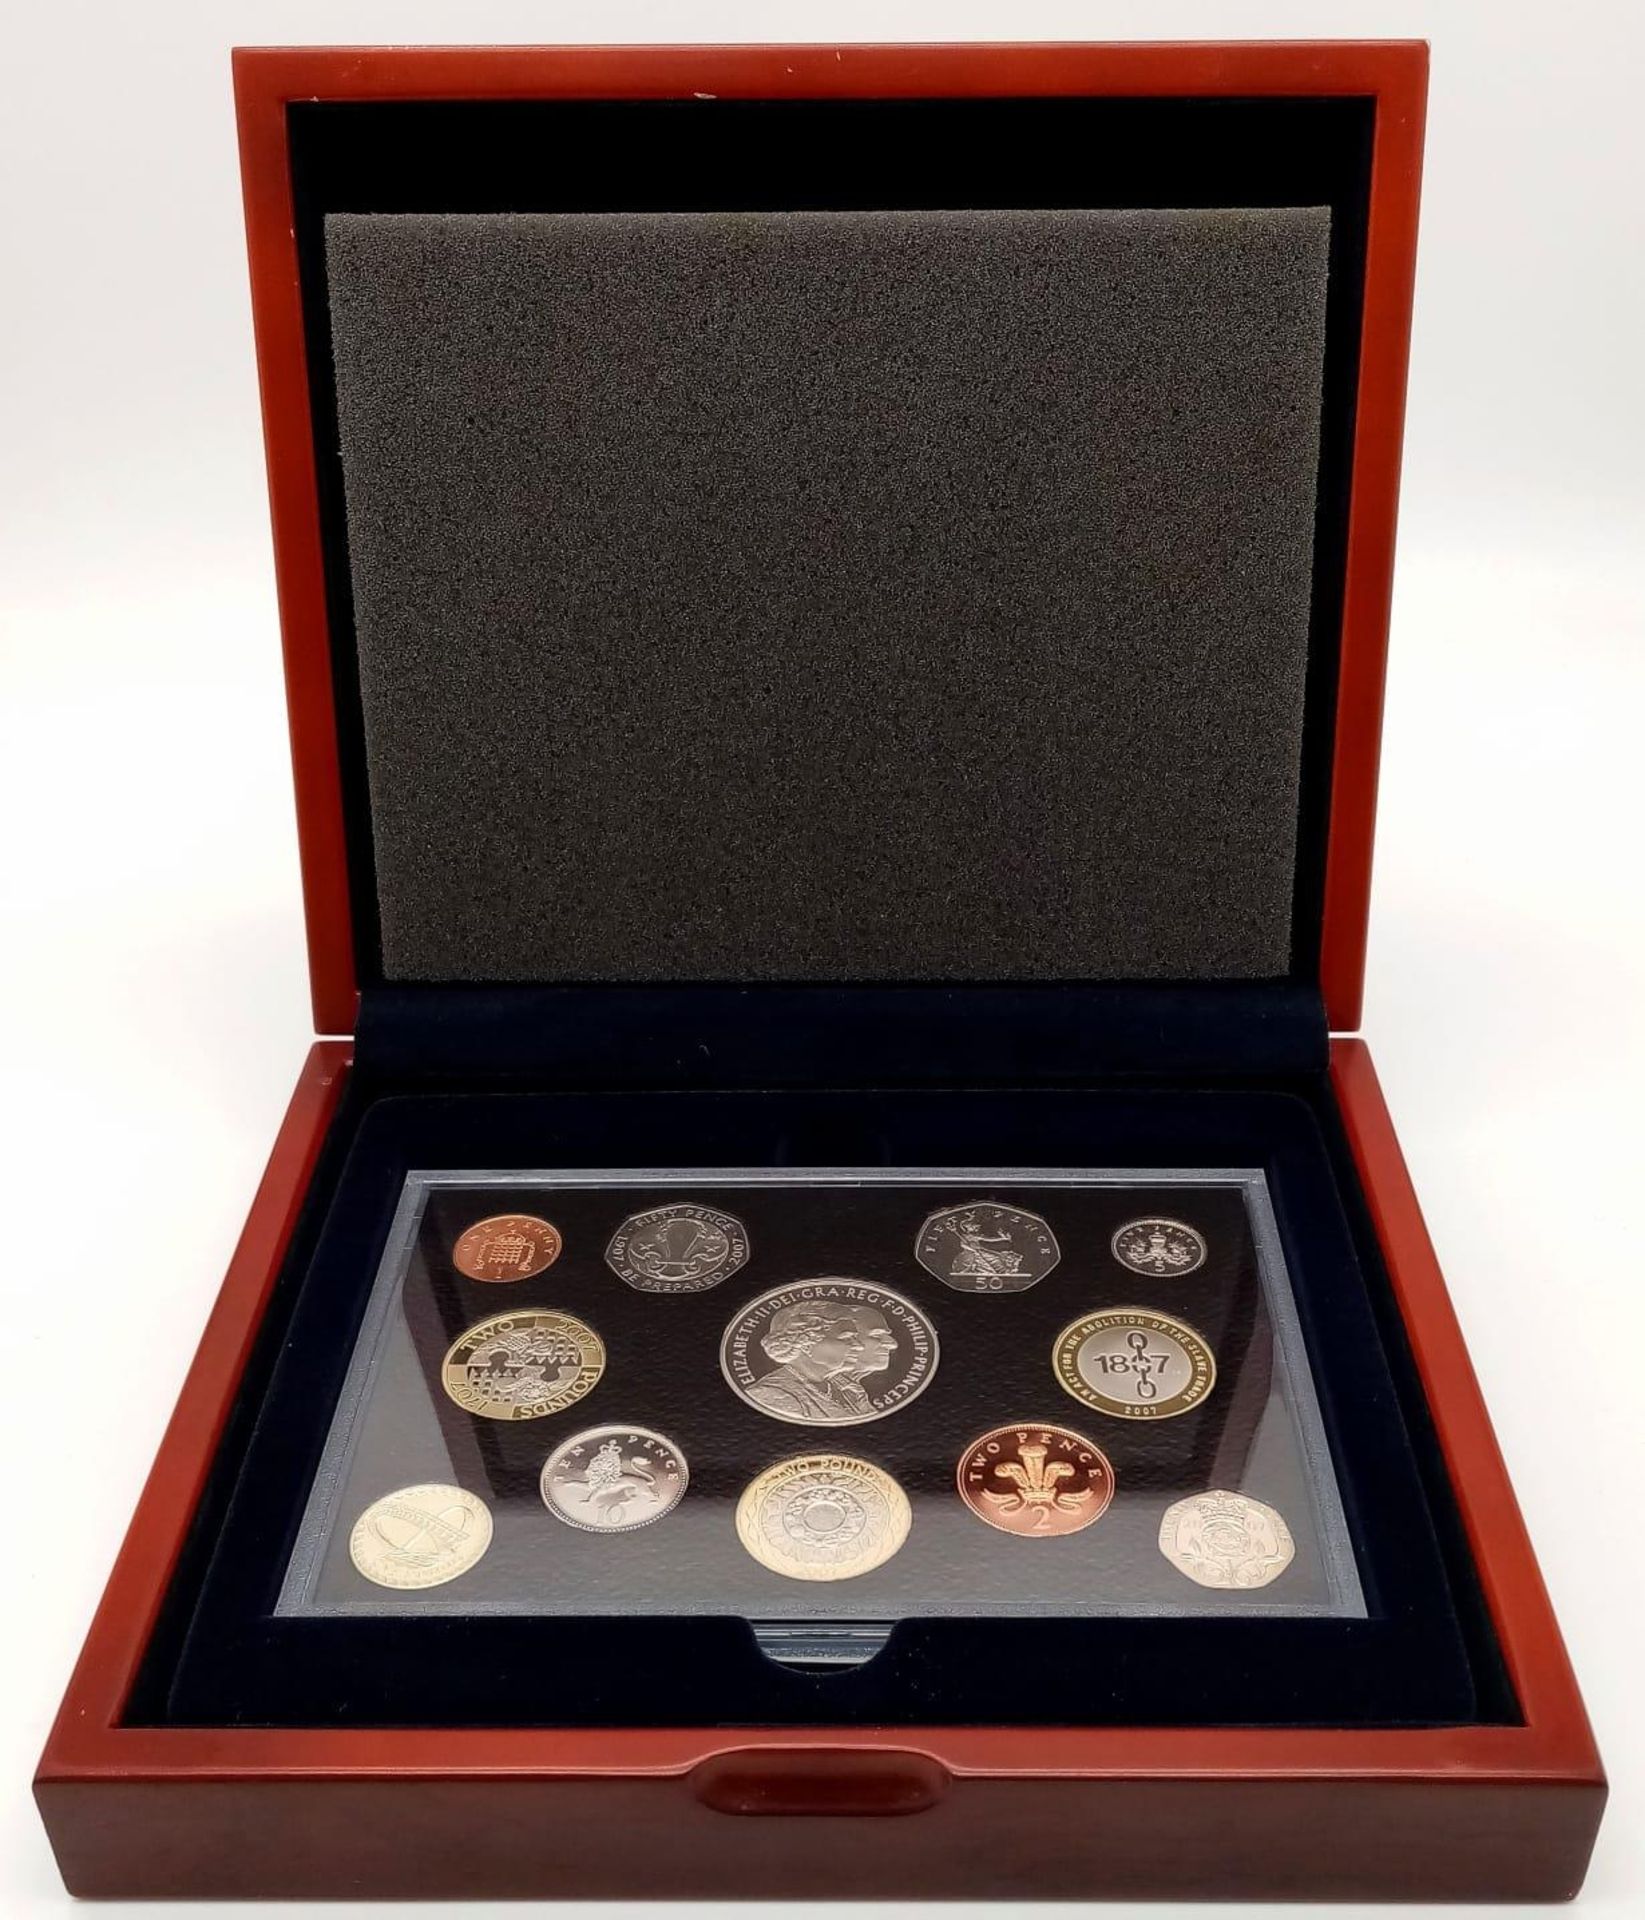 A Royal Mint 2007 Executive Proof Coin Set. 12 coins in total. Comes in a wood presentation case.